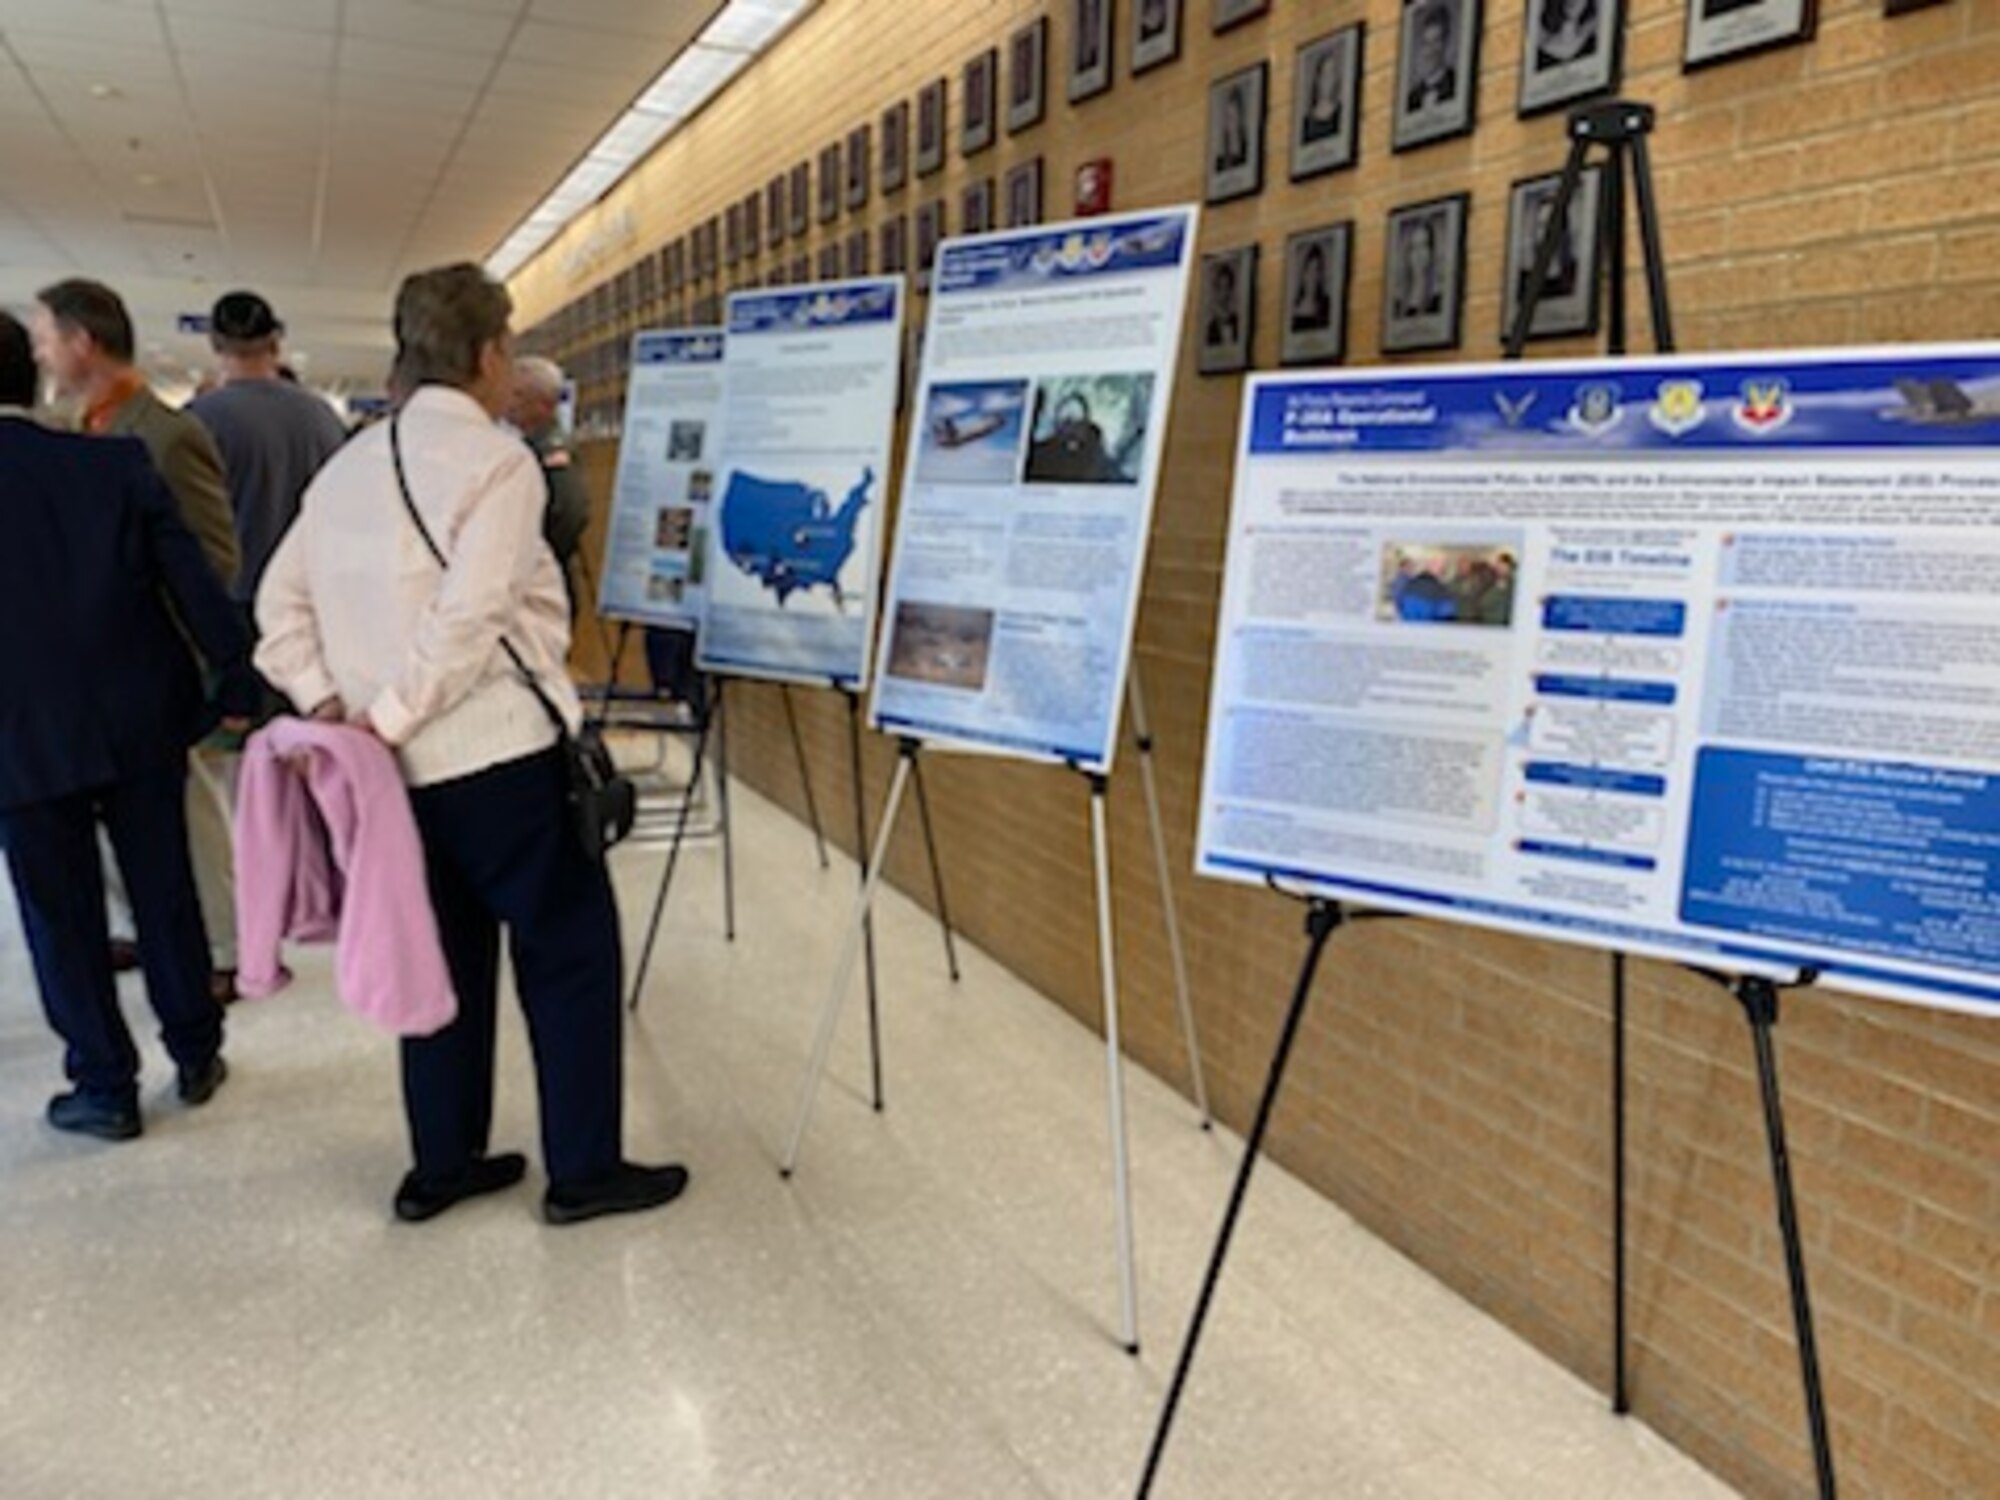 Members of the local community attend and comment on the U.S. Air Force’s Draft Environment Impact Study on the proposed AFRC F-35A operational beddown on March 5, 2020 at Brewer High School Auditorium, Fort Worth, Texas.The invitation to attend, as well as share comments or concerns, was open to all in an effort to allow each person's voice to be heard. All comments were collected and recorded in order to be shared with Secretary of the Air Force Barbara Barrett, who will make the final decision on where the 5th generation fighter will call home. (U.S. Air Force photo by Julie Briden-Garcia)